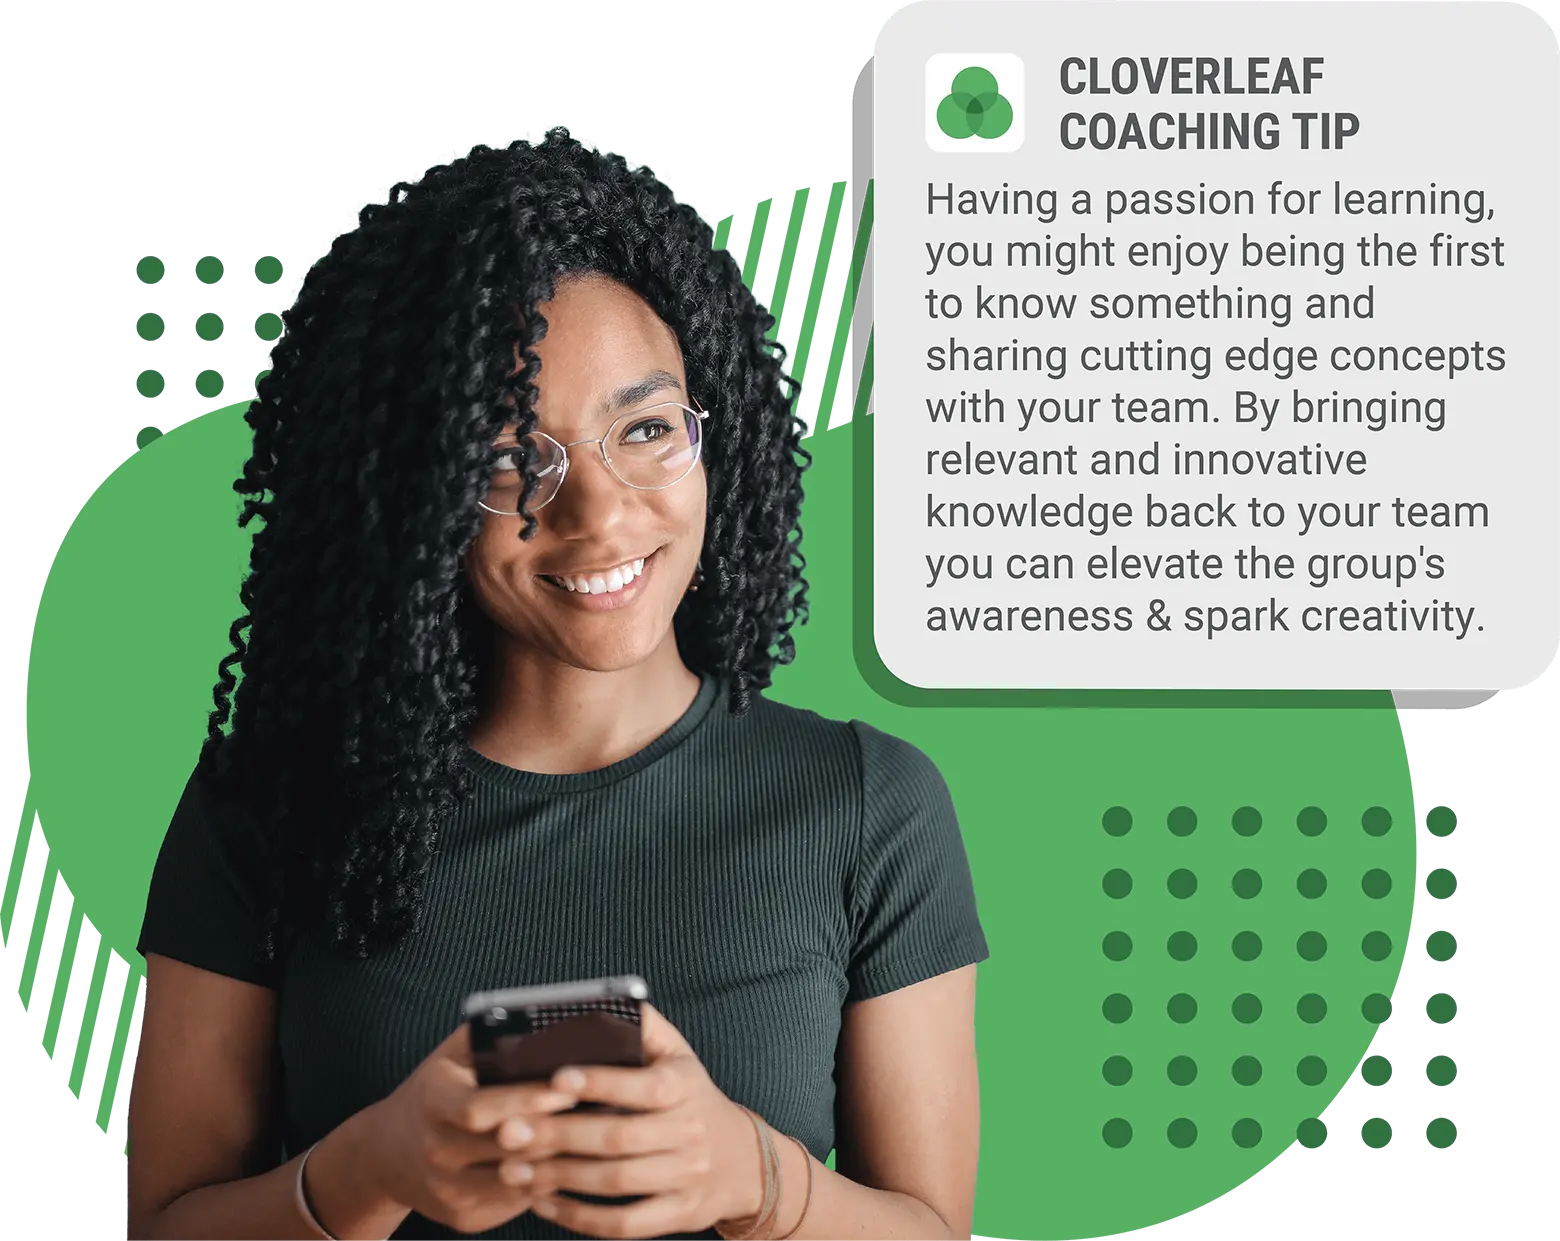 Cloverleaf coaching tip: Having a passion for learning, you might enjoy being the first to know something and sharing cutting edge concepts with your team. By bringing relevant and innovative knowledge back to your team you can elevate the group's awareness & spark creativity.